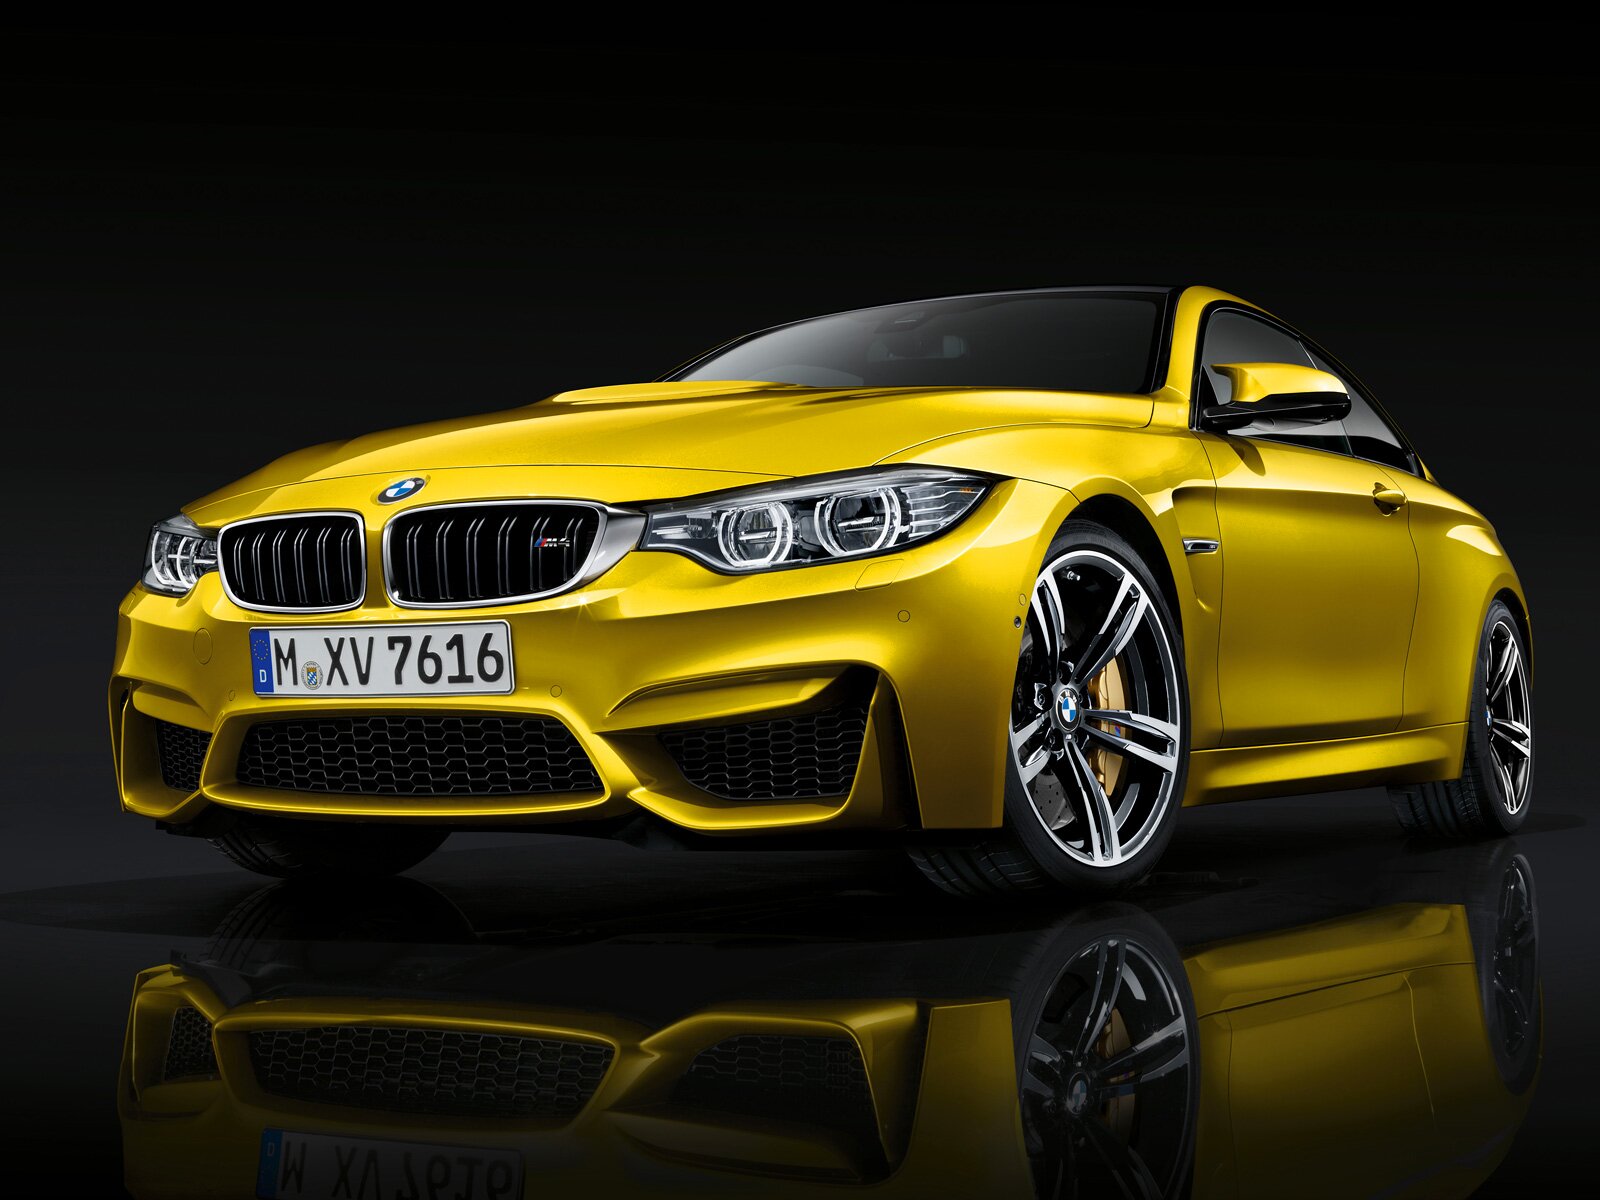 The new BMW M4 is rather brash in design as opposed to the understated elegance of previous generations